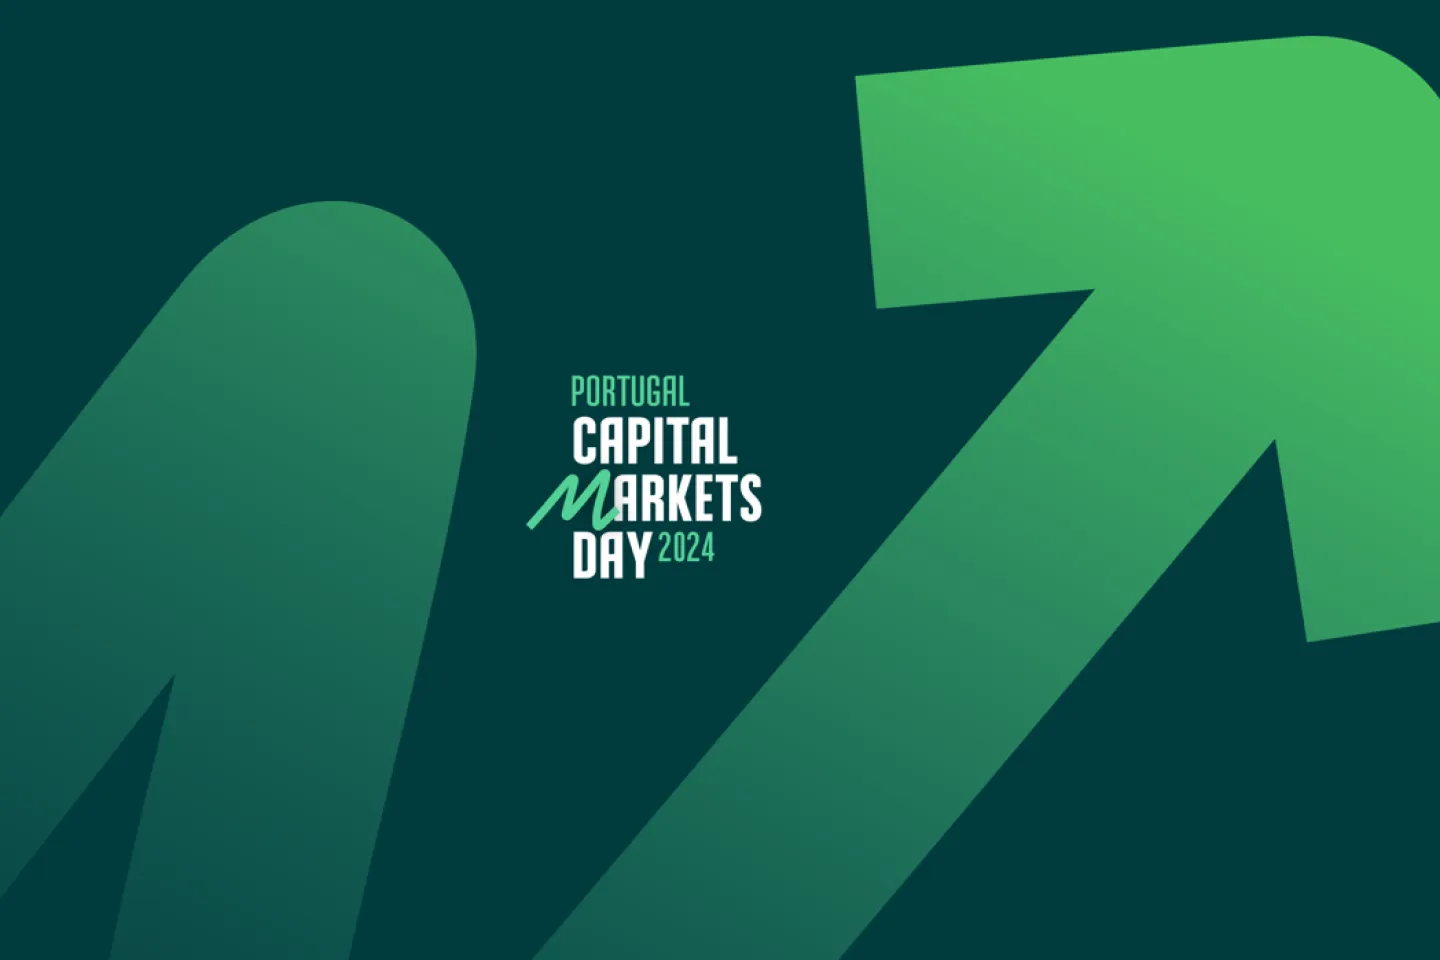 Portugal Capital Markets Day 2024